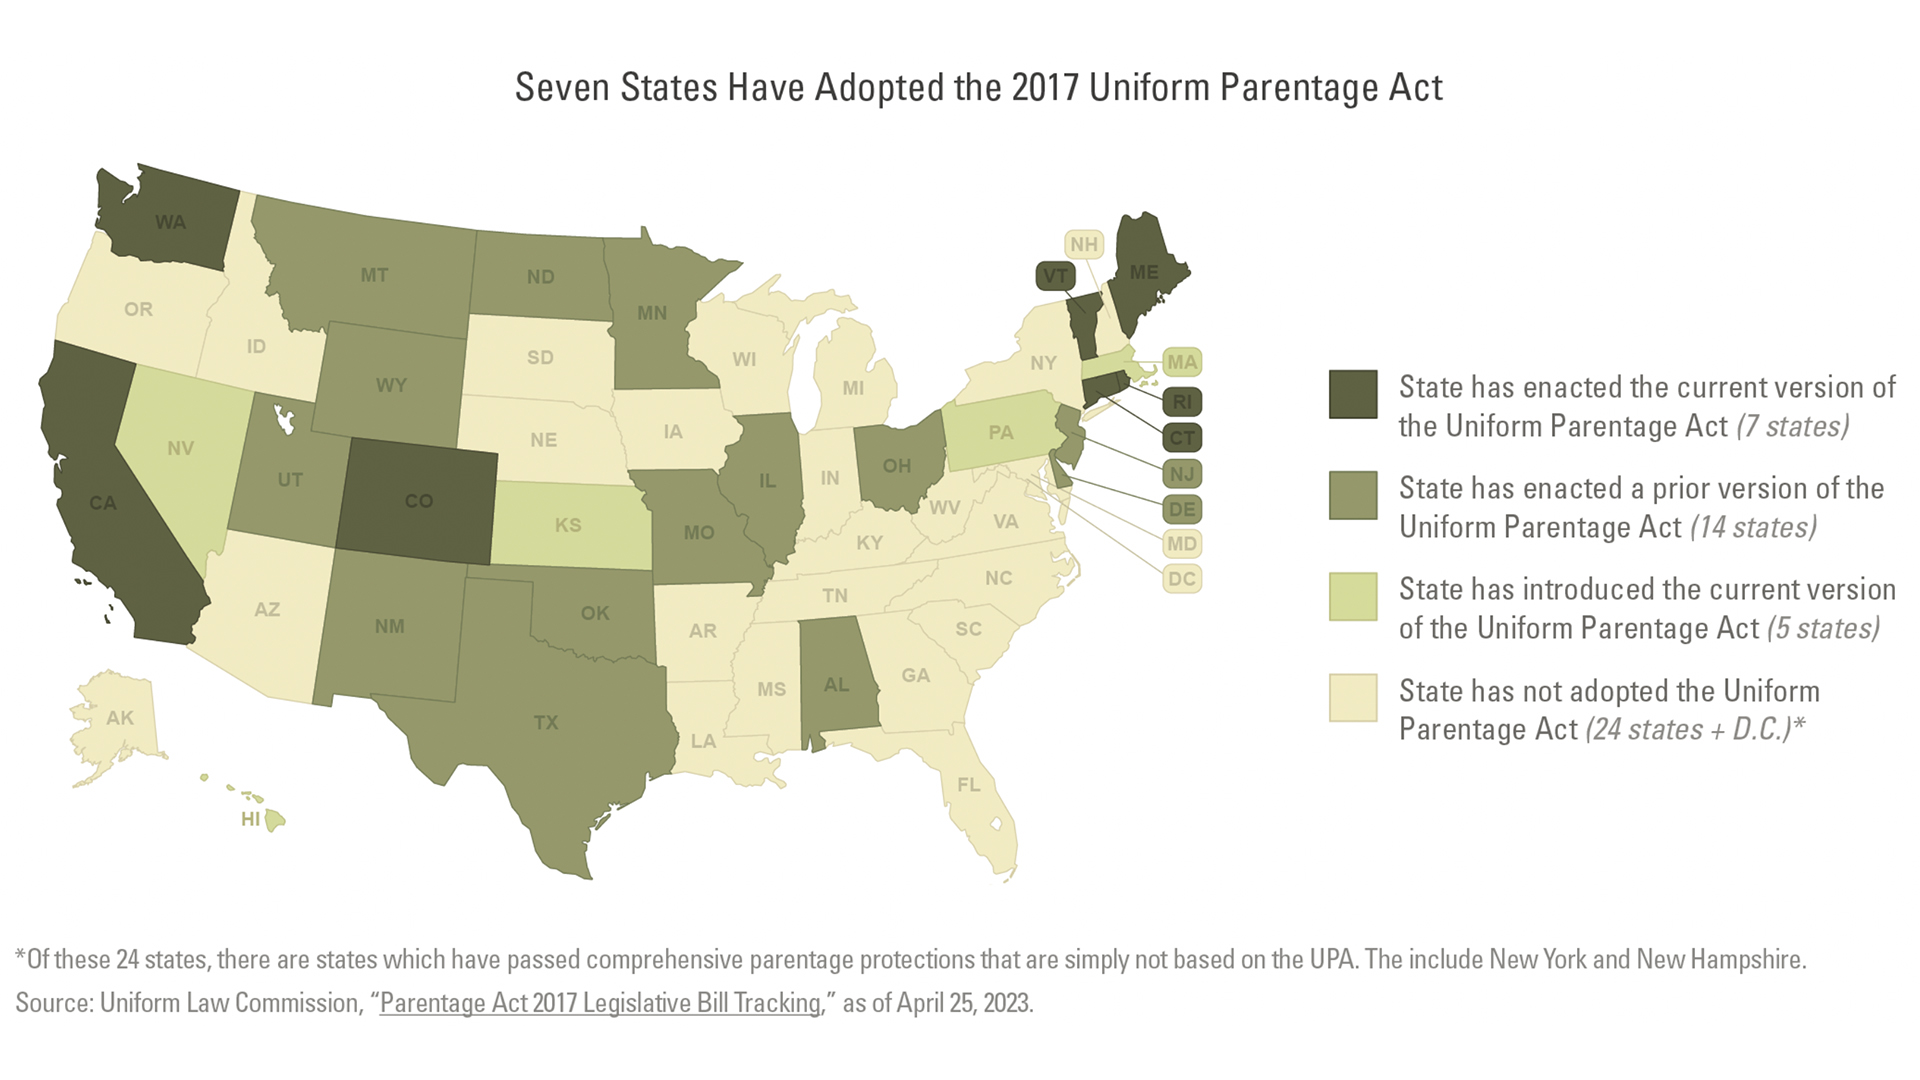 A state-level map with the title "Seven States Have Adopted the 2017 Uniform Parentage Act" use different color shades showing the state-level actions on the legislation, including enacting a current version, enacting a prior version, introducing the current version, and not adopting it.